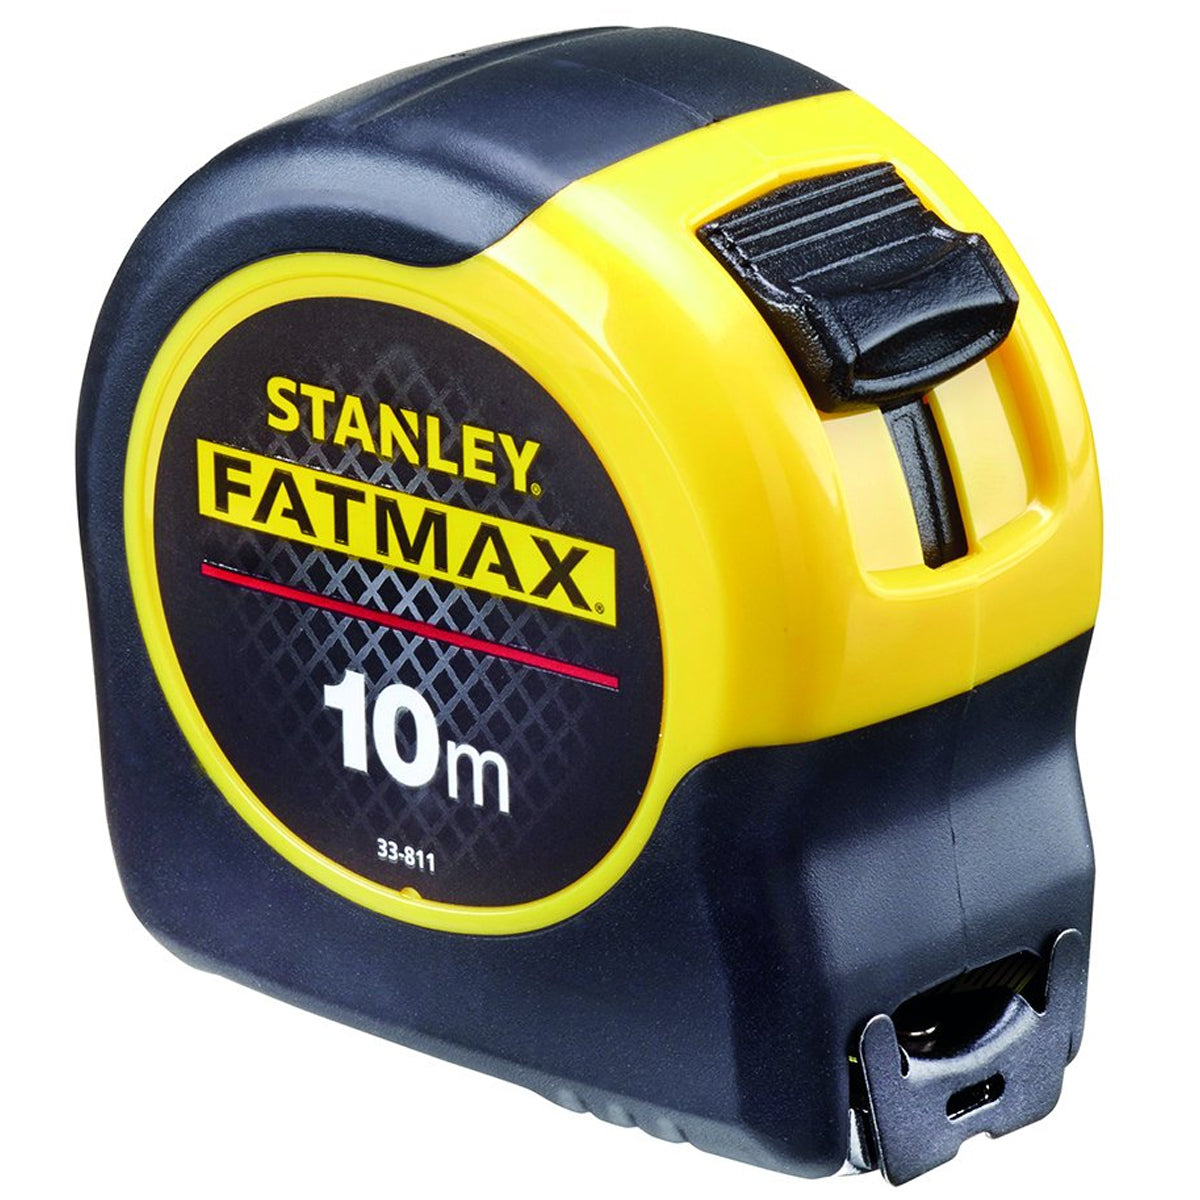 Stanley 0-33-811 FatMax Metric Only Tape Blade Armor 10m STA033811